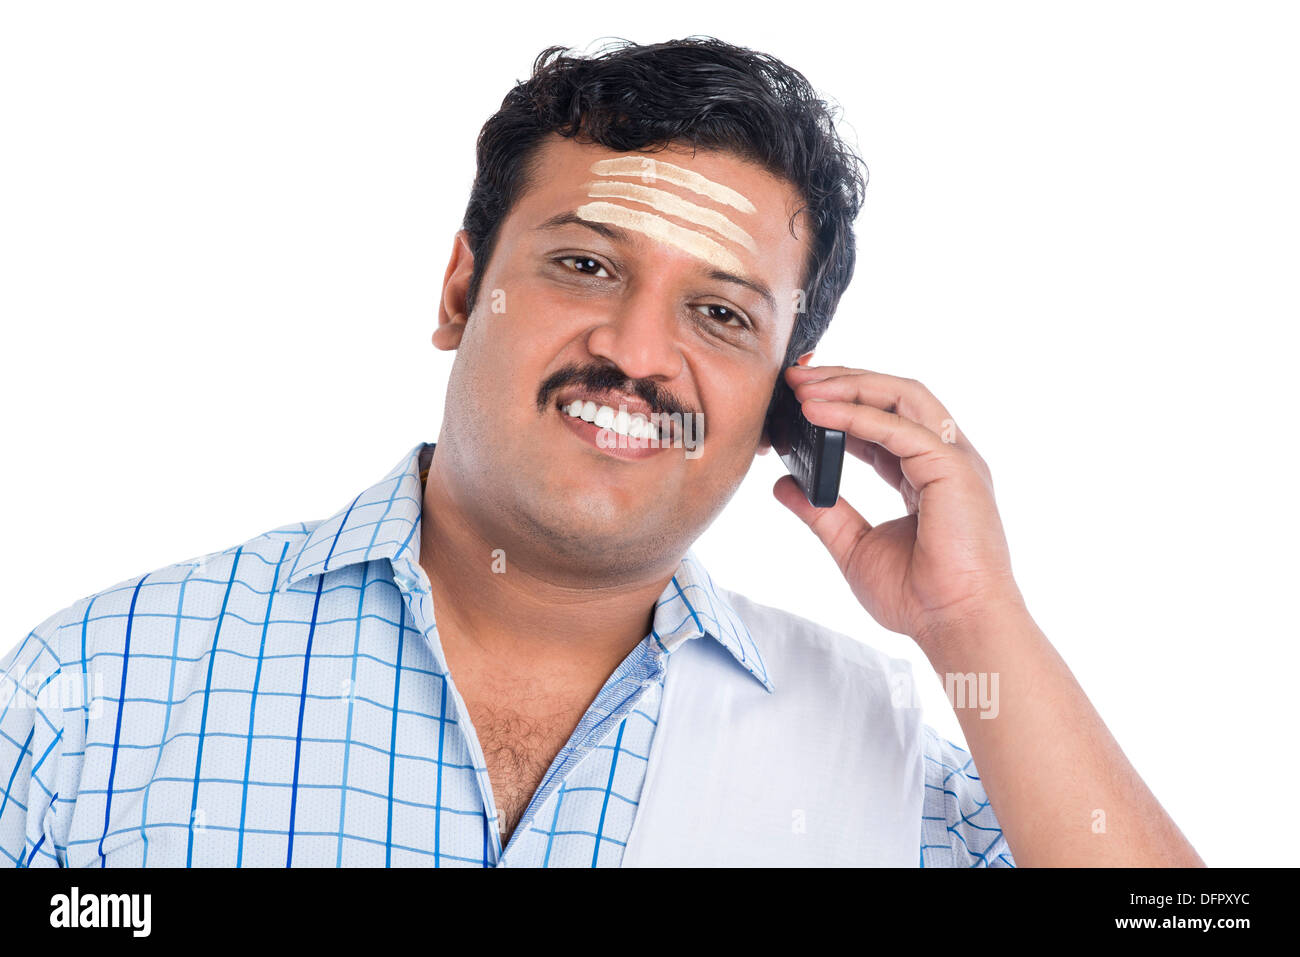 South Indian man talking on a mobile phone Banque D'Images